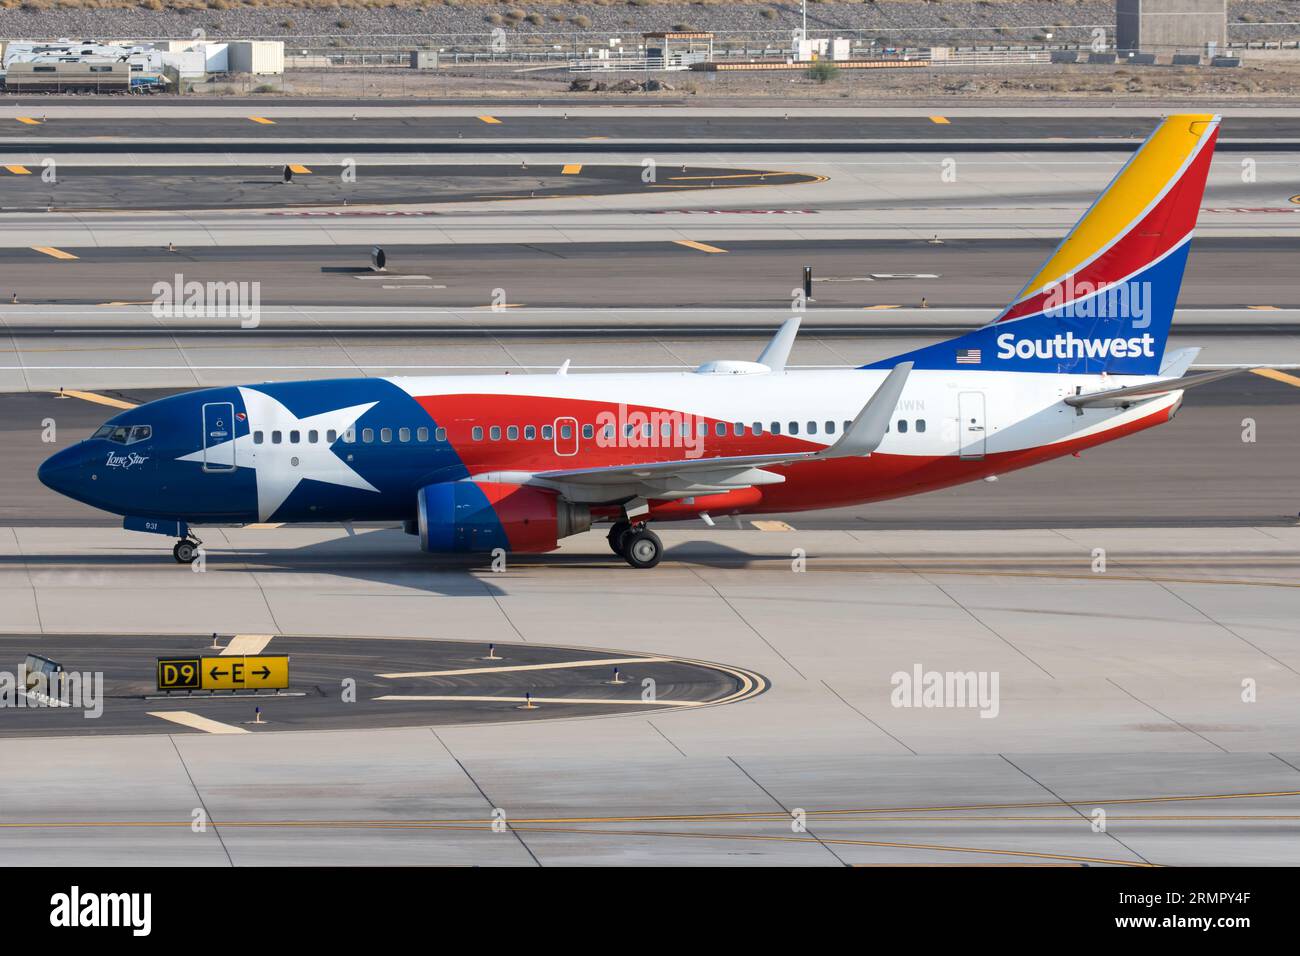 Southwest Airlines' 'Lone Star One' special livery features the state flag of Texas. Stock Photo